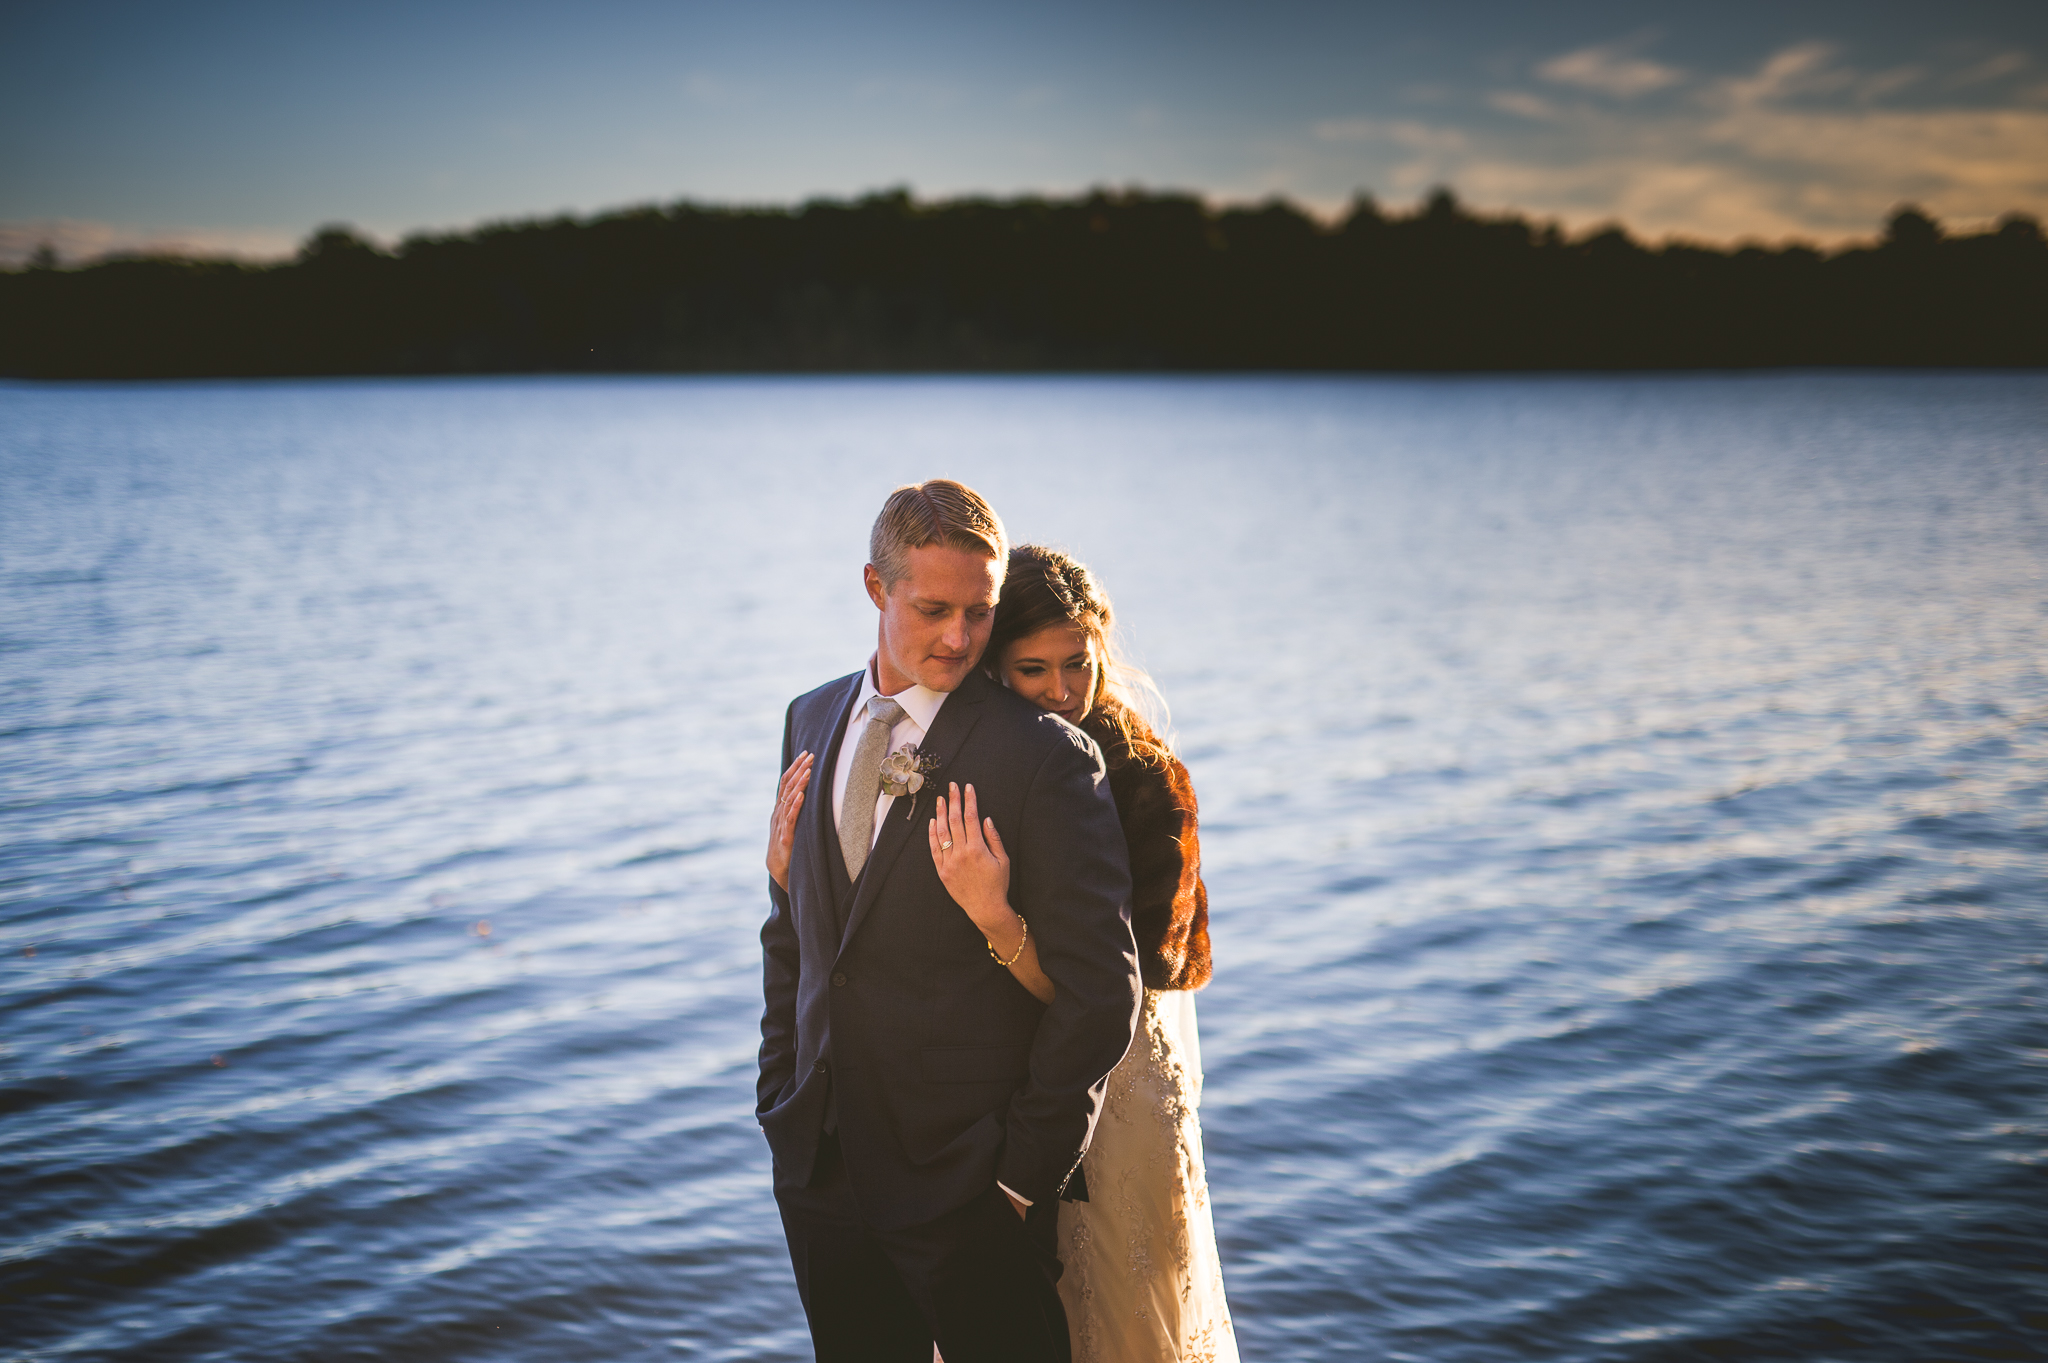 09 bridal portraits at stouts island - Mandy + Mike // Amazing Wedding at Stout's Island Wisconsin Preview